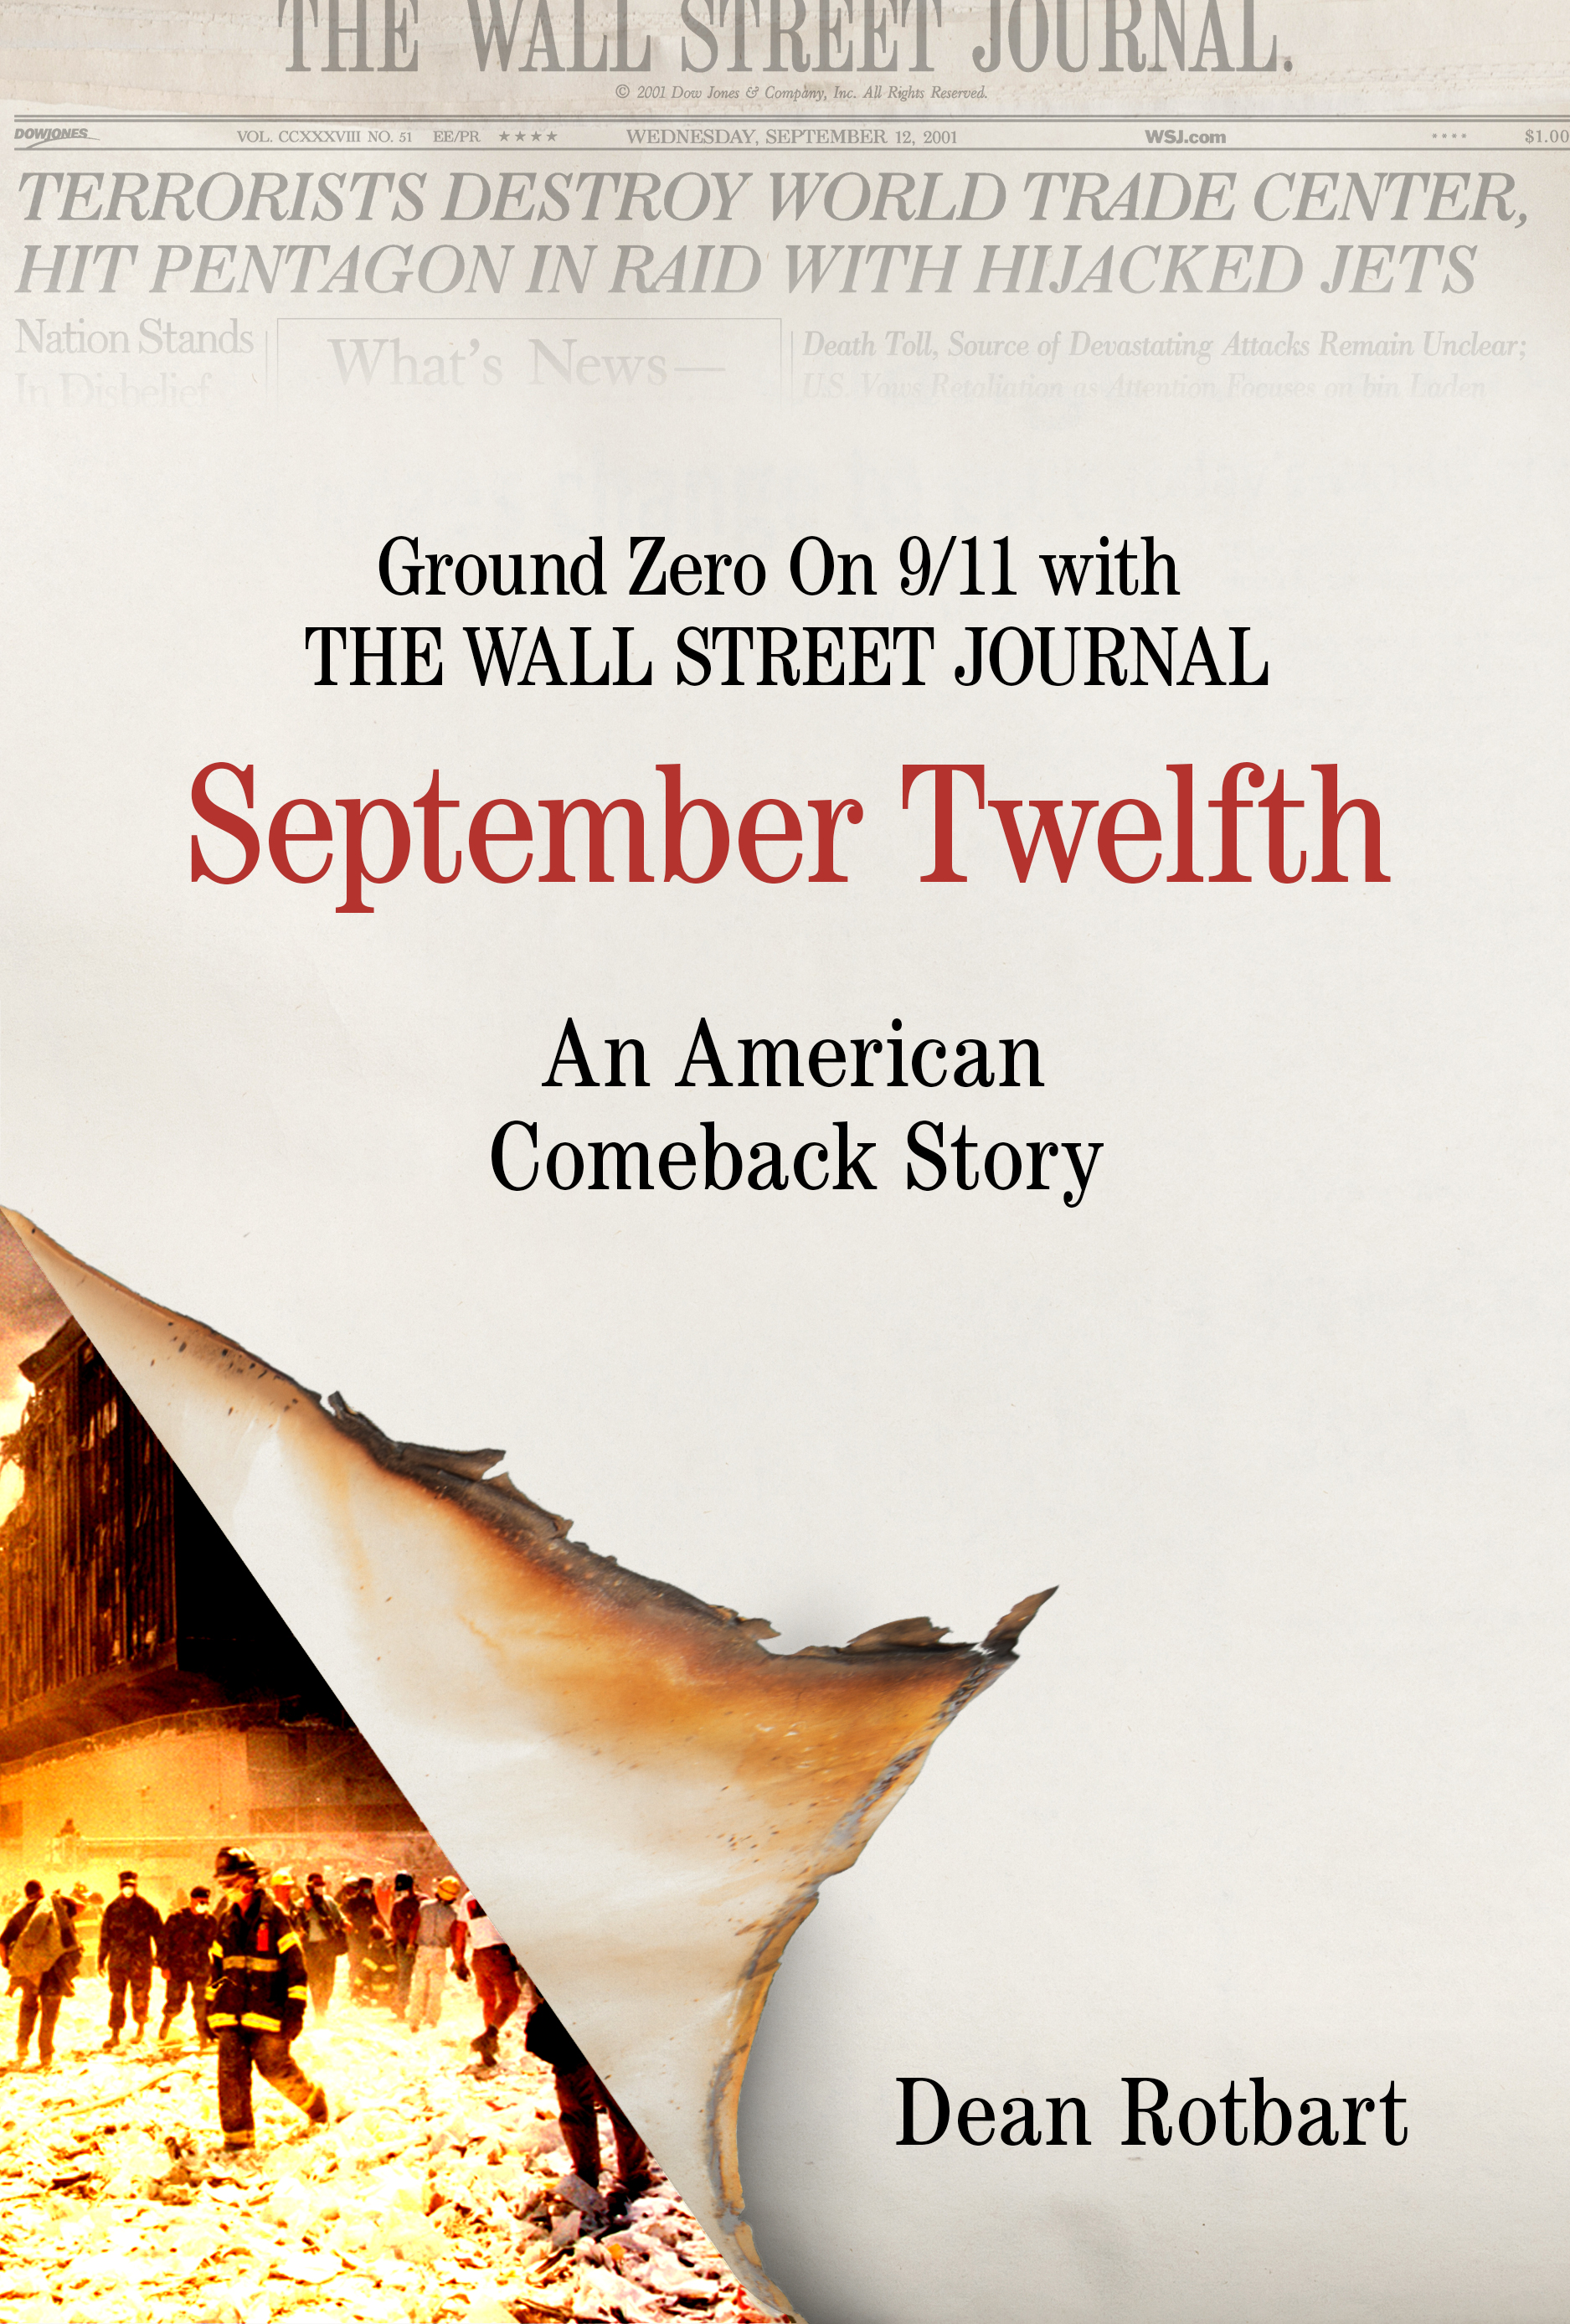 "September Twelfth": A Newsroom's Courageous Response to 9/11